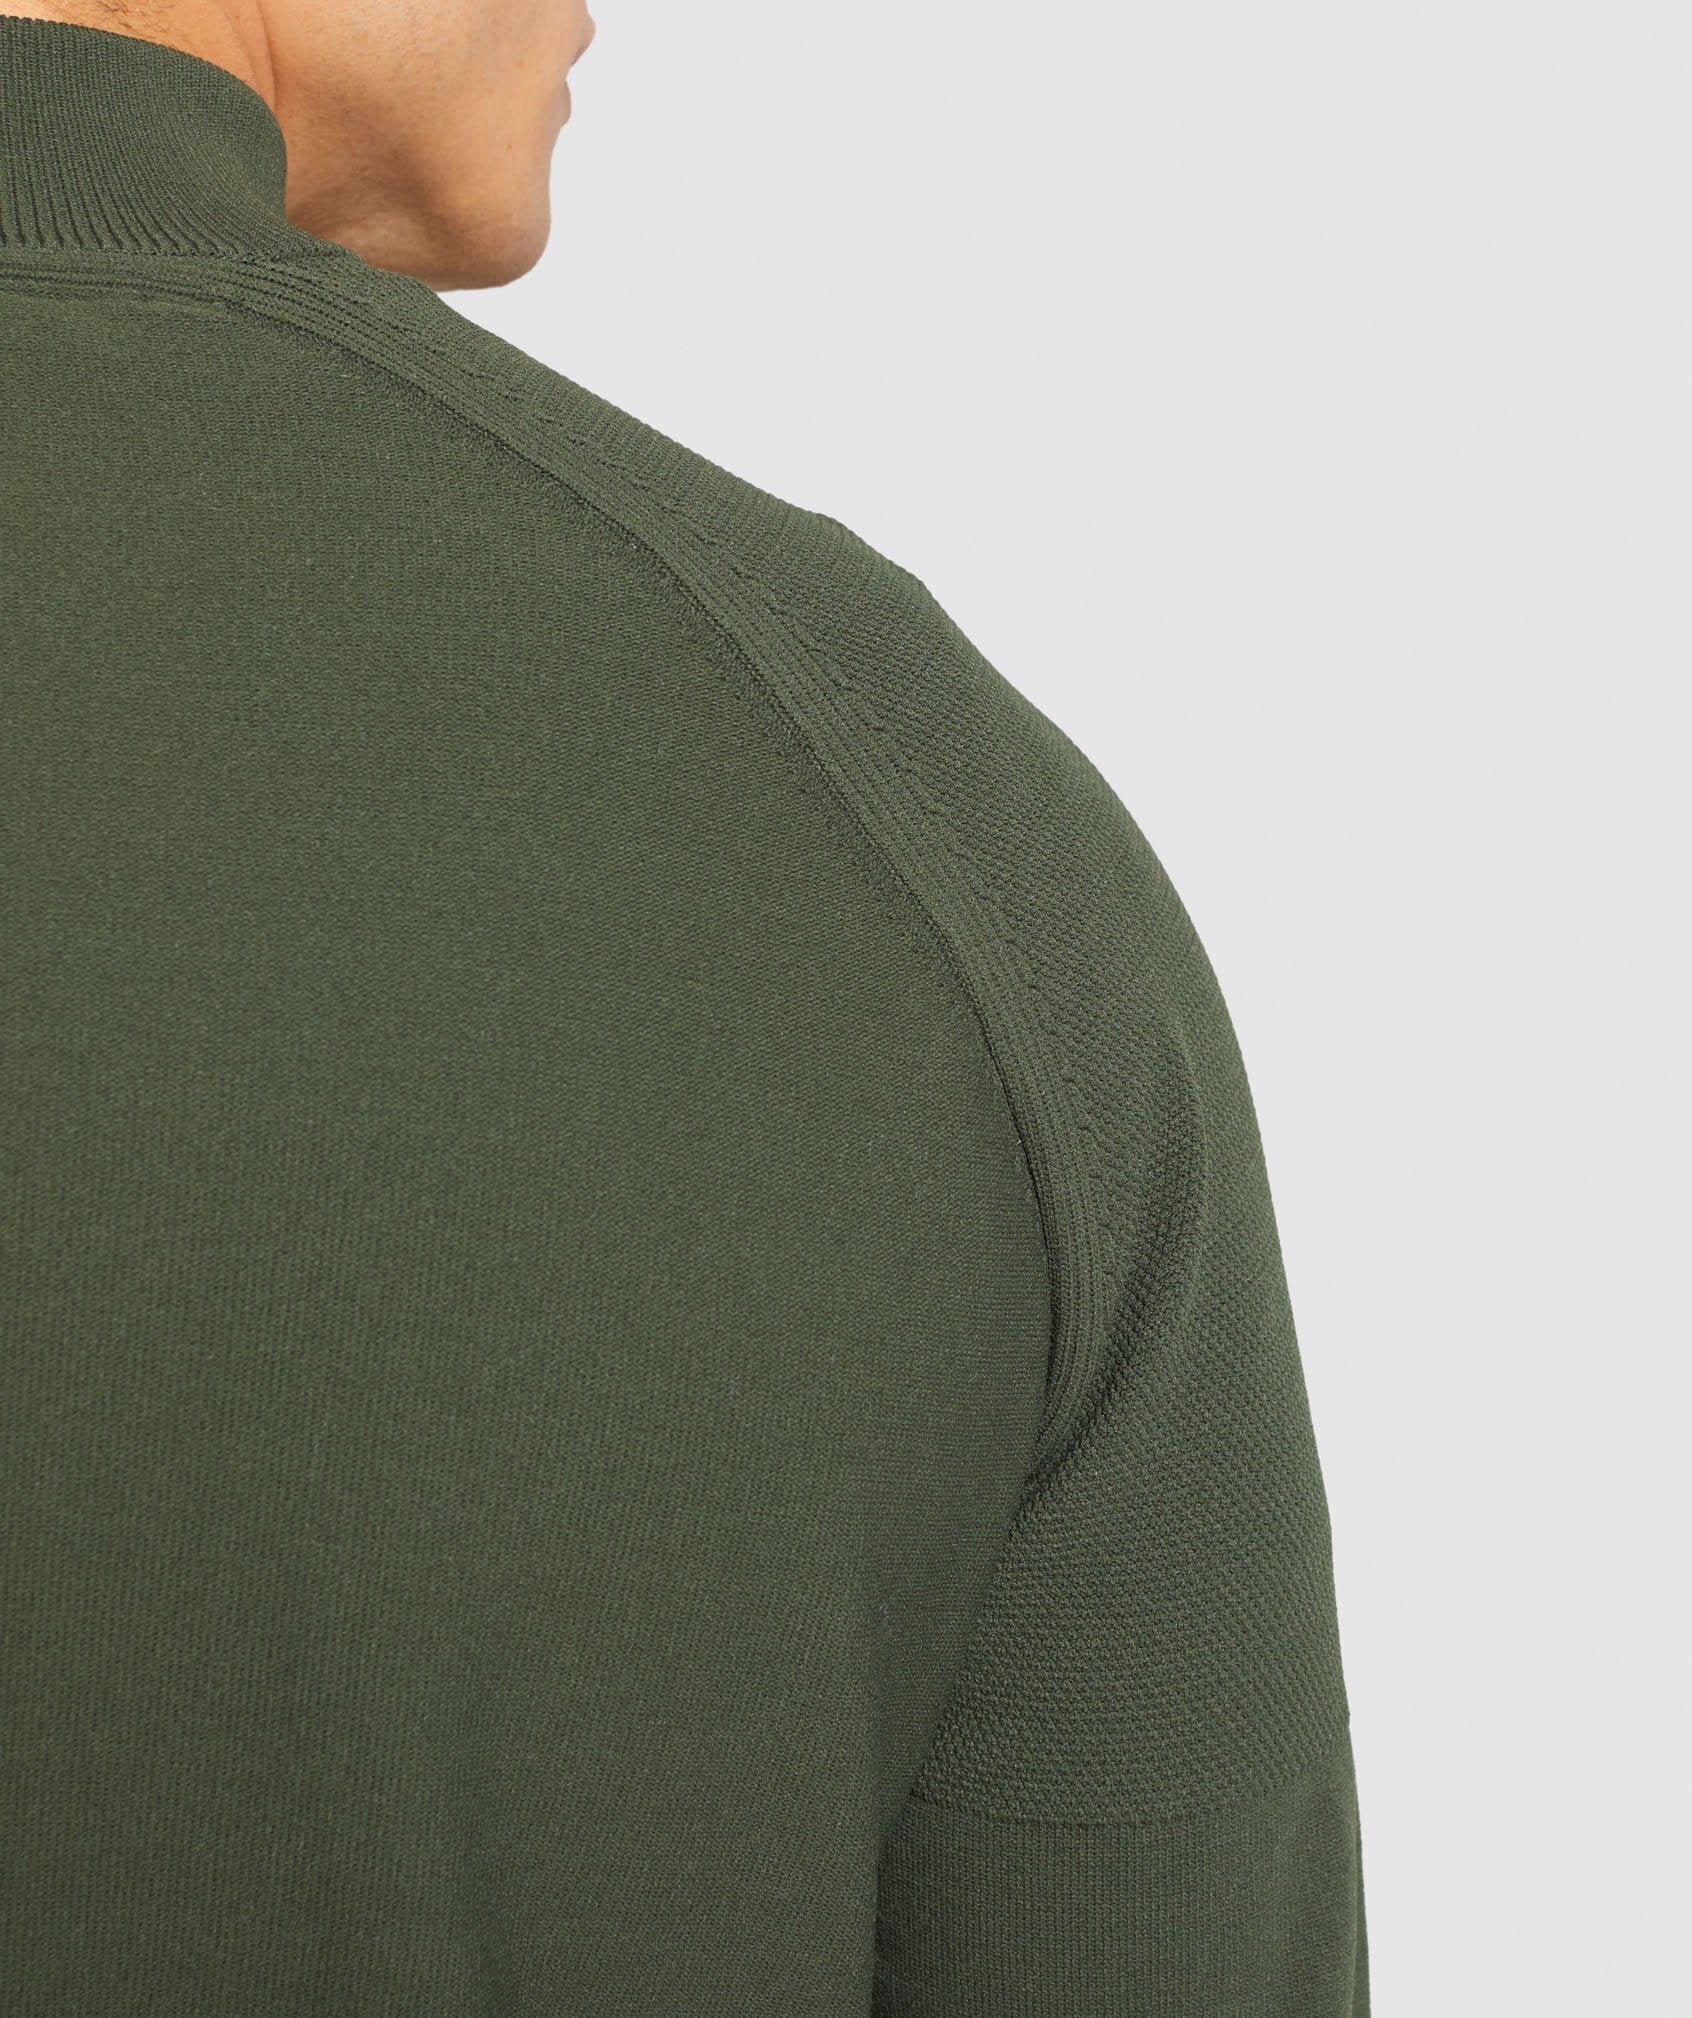 True Knit Zip Up in Green - view 6